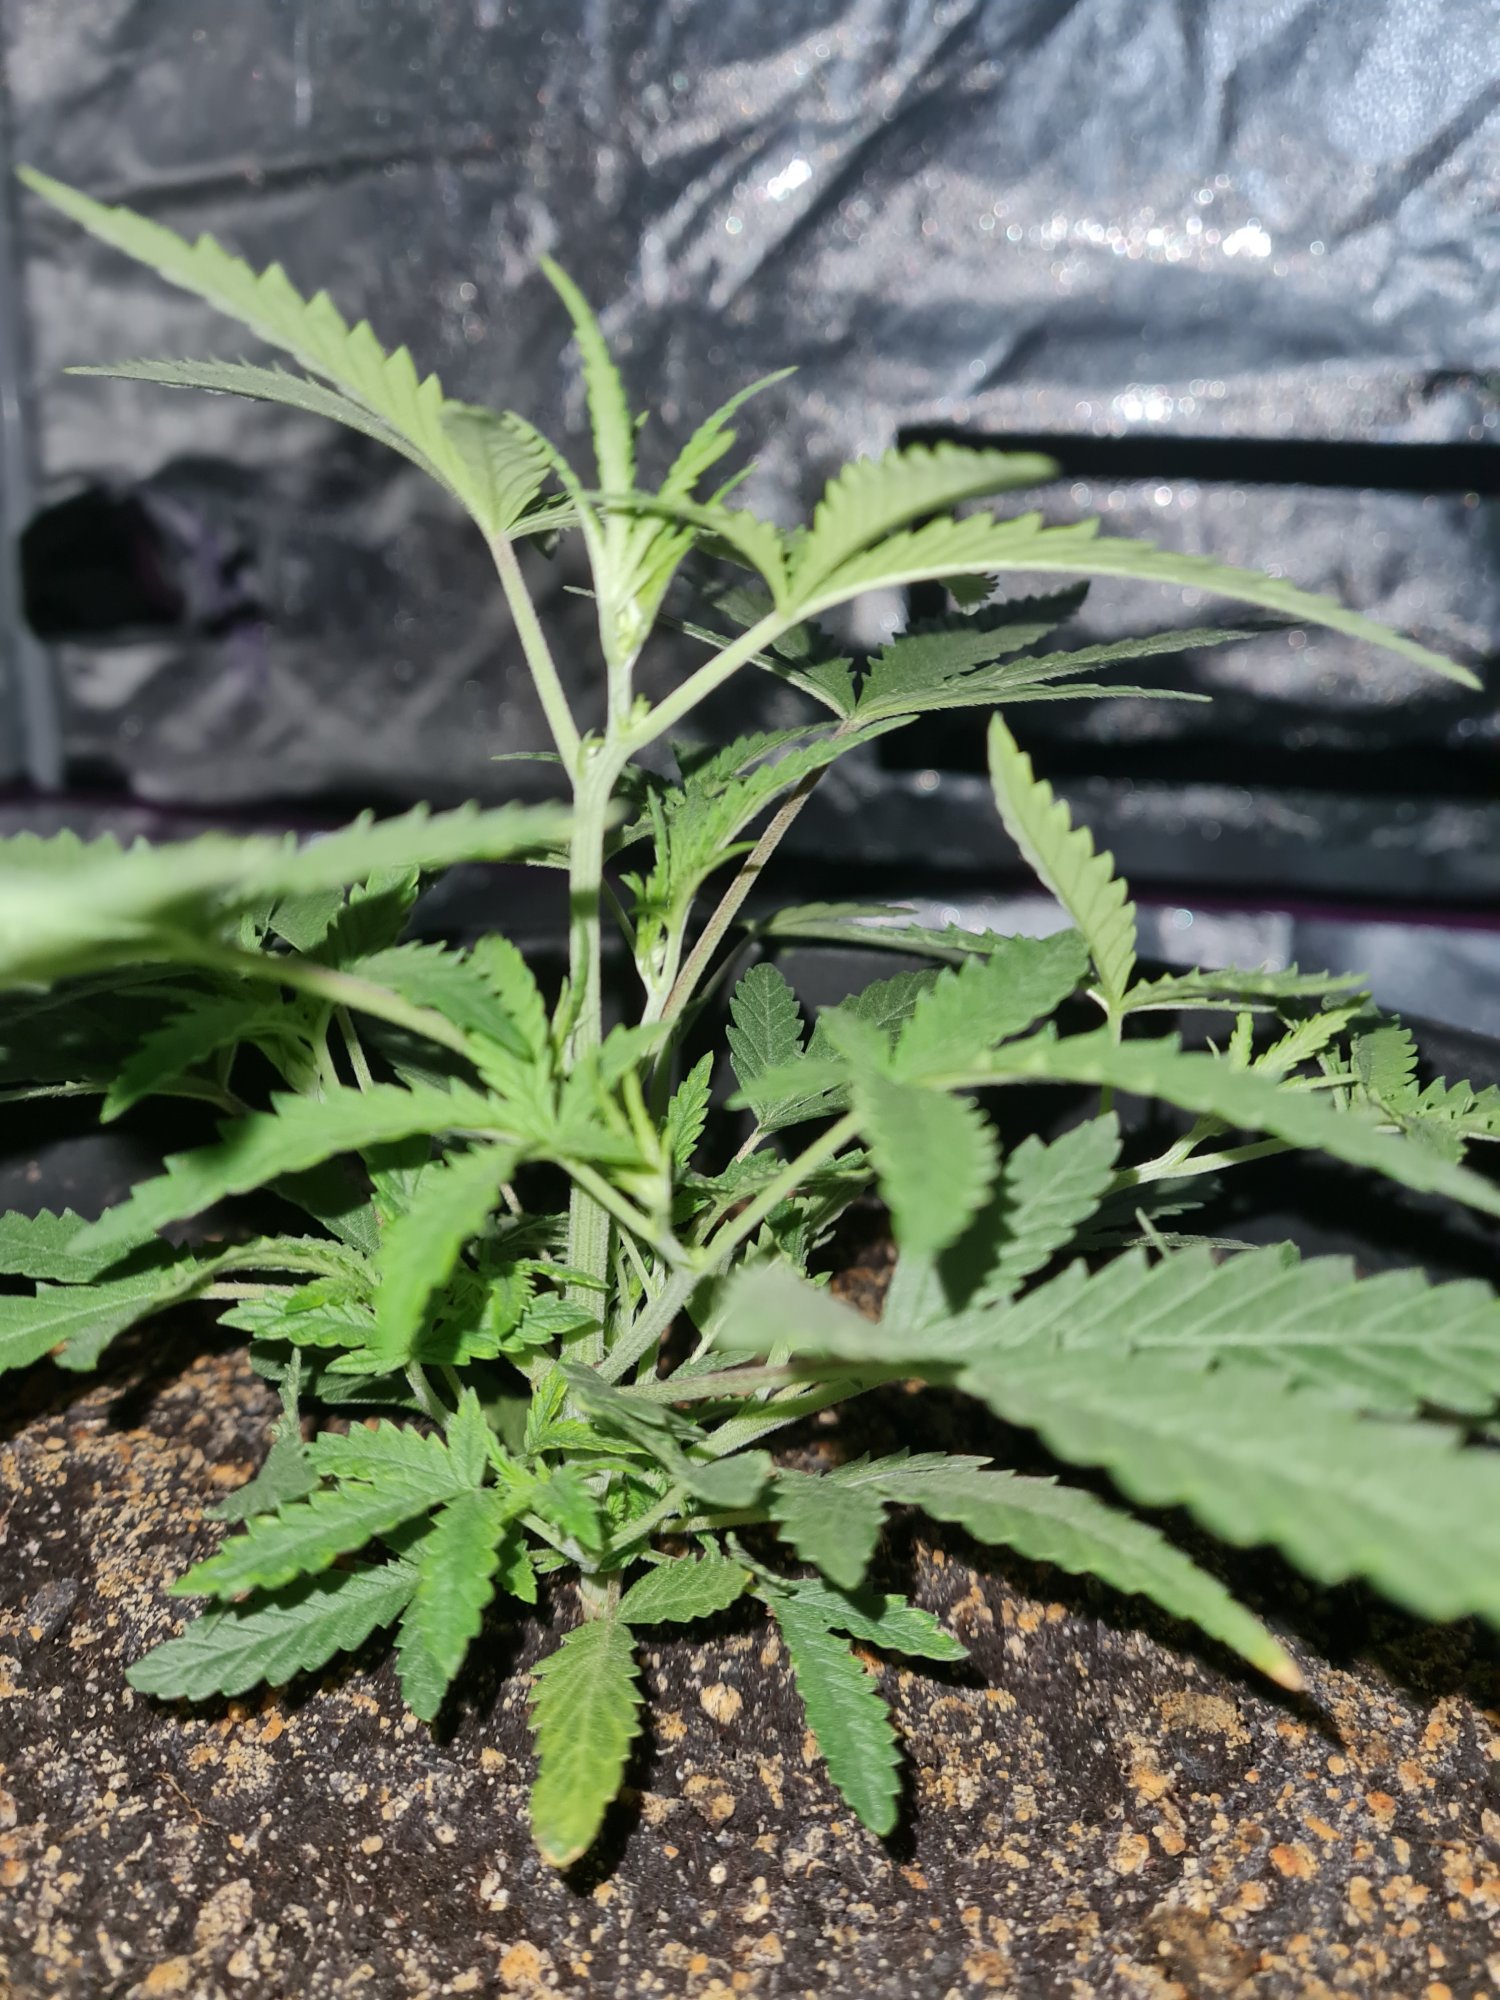 When to start bloom nutes on a auto 16